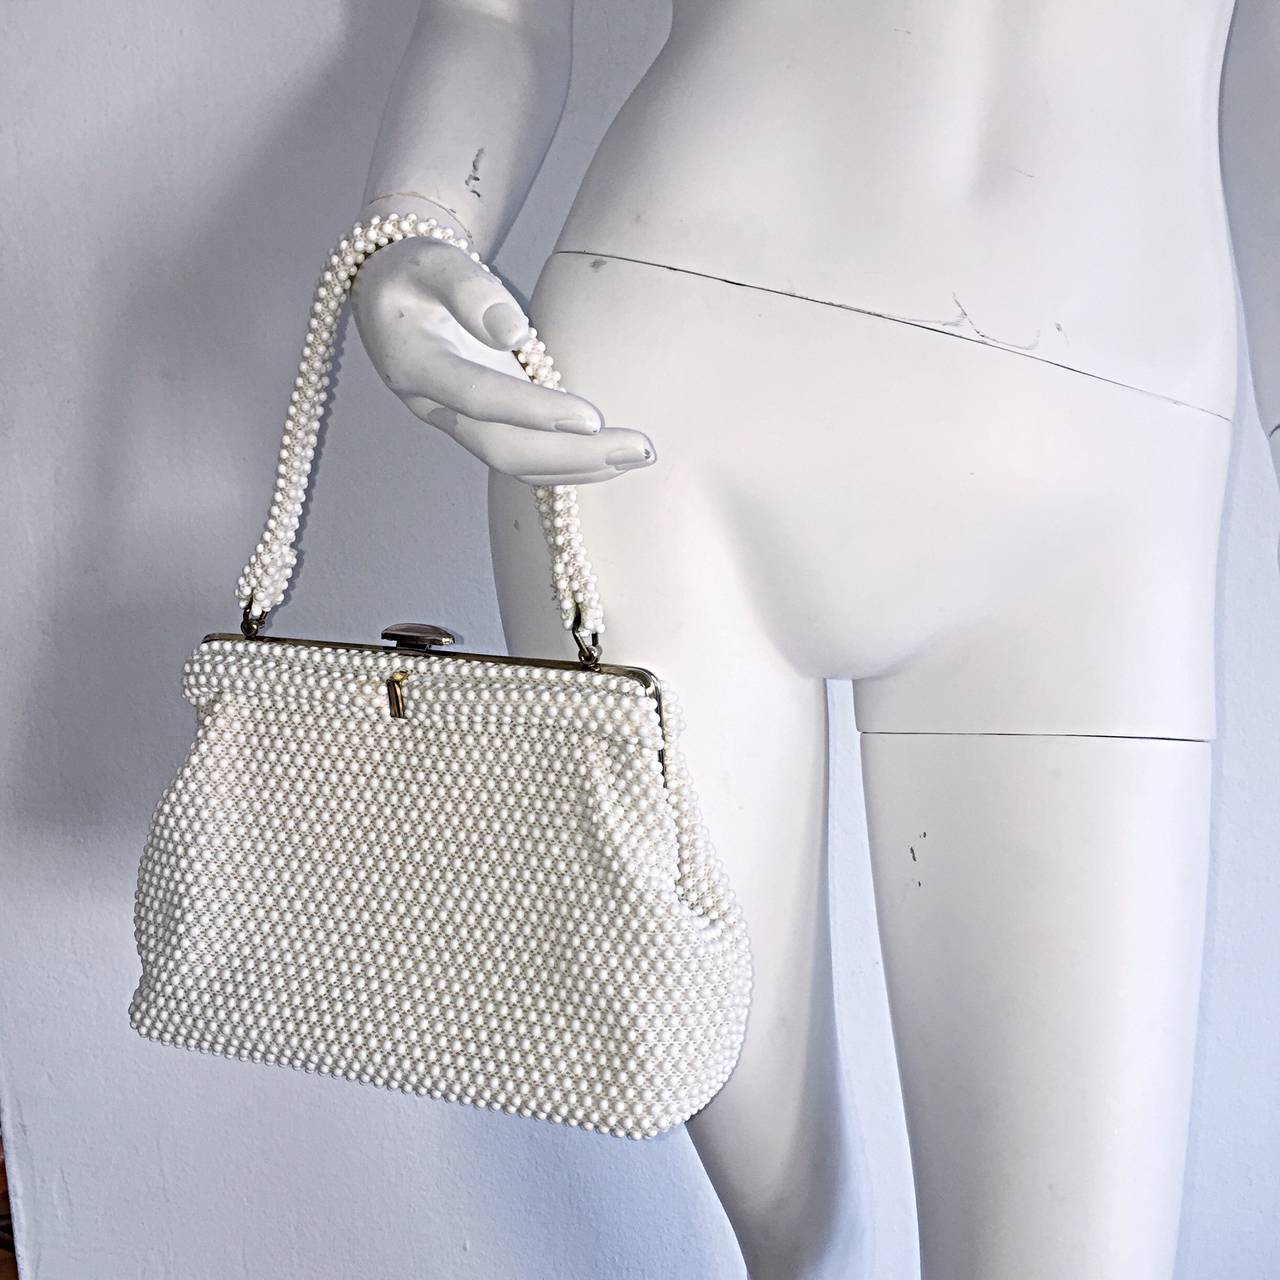 Beautiful white 1960s 'Goosebump' beaded evening bag! Classic style, with a modern size that will easily accommodate plenty. Clasp closure, with a strap that can be worn on the hand, or over the shoulder. Features interior pocket. In great